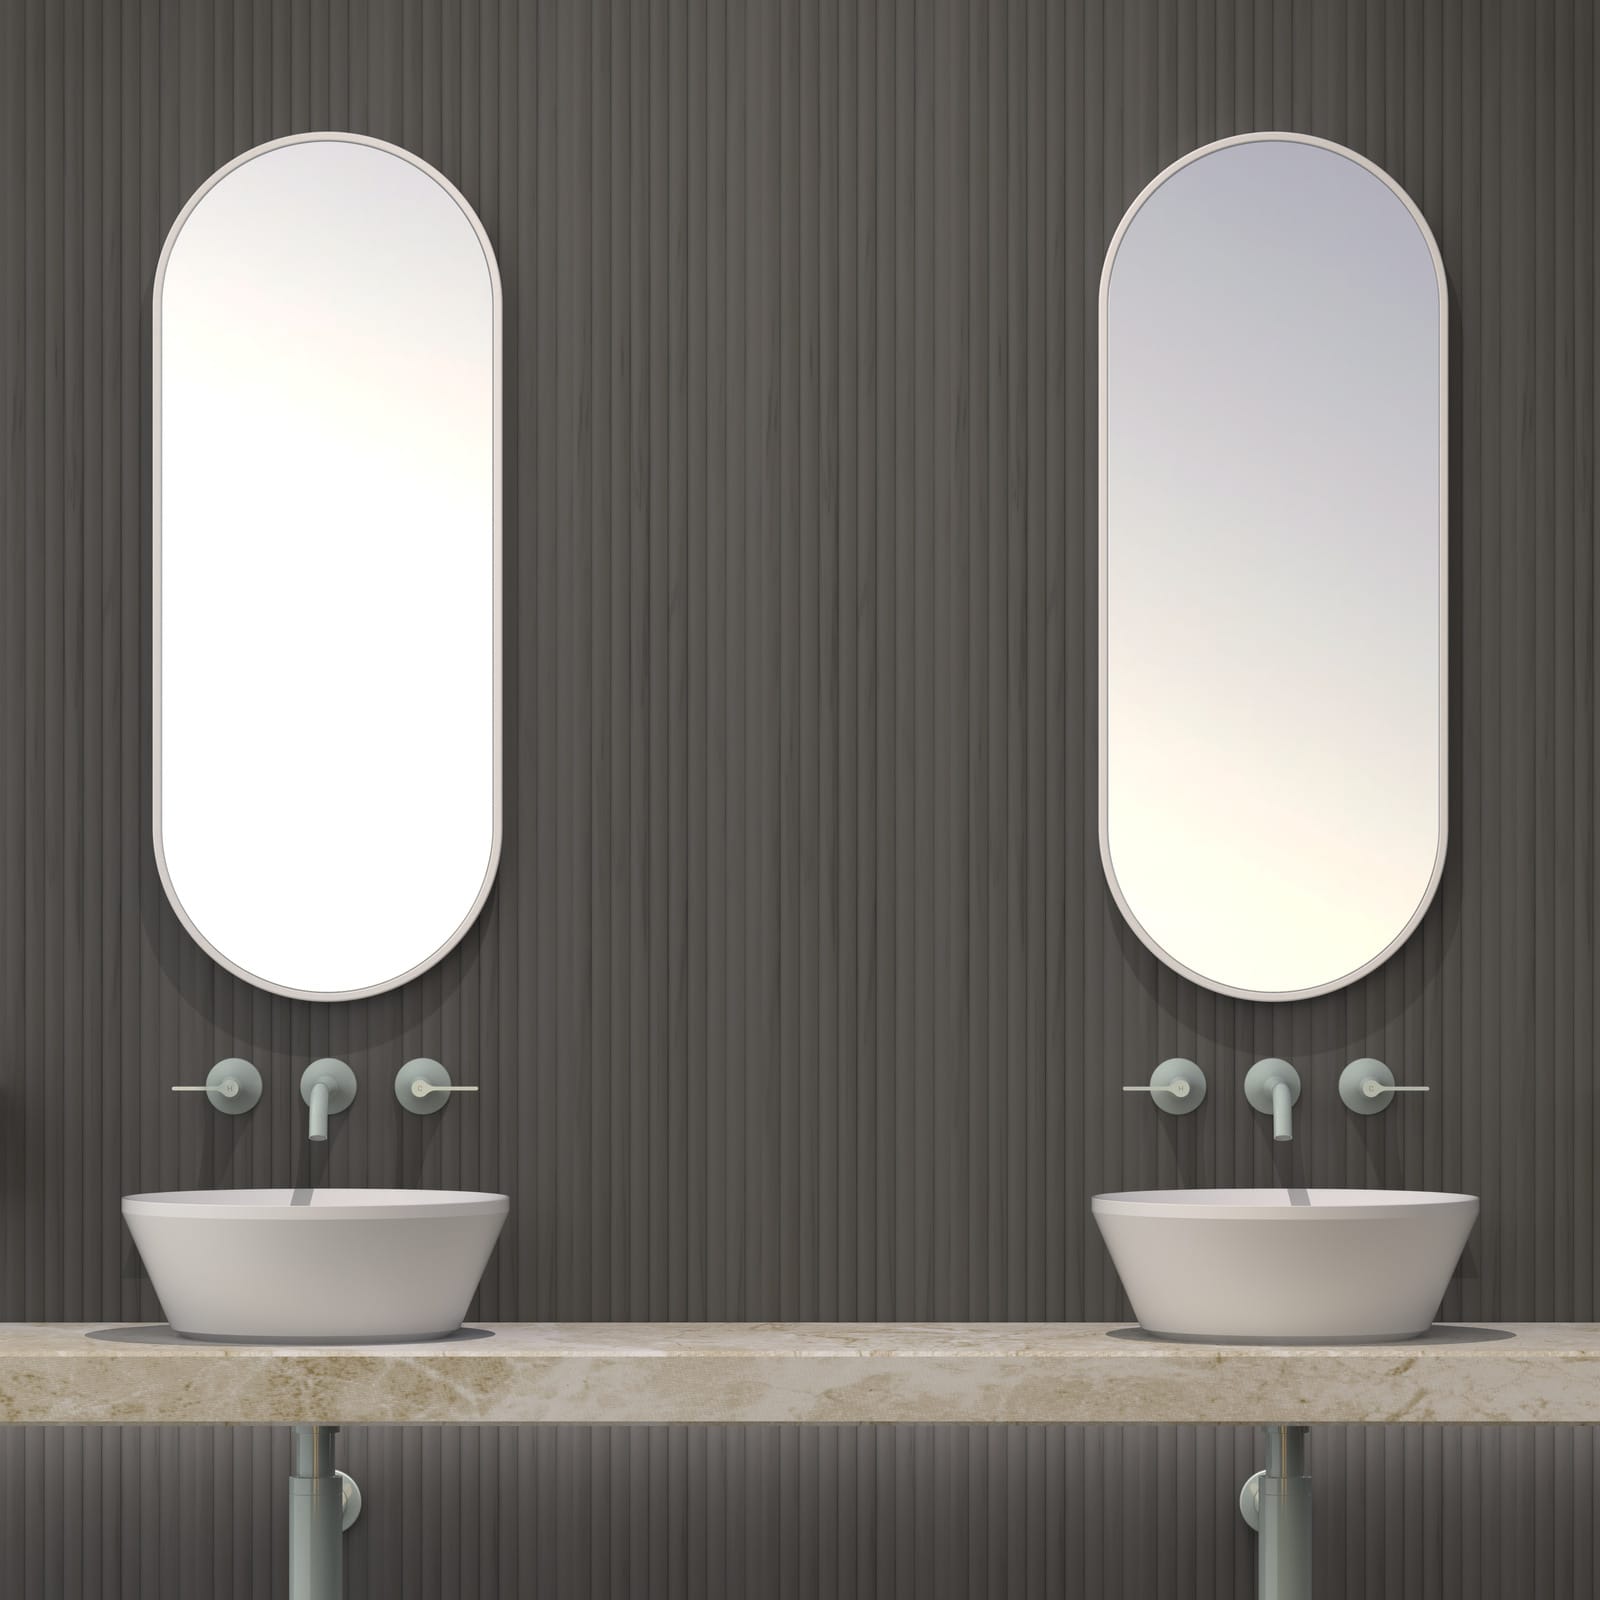 A render image of Par Taps wall mixer sets situated above a white basin with a round mirror above